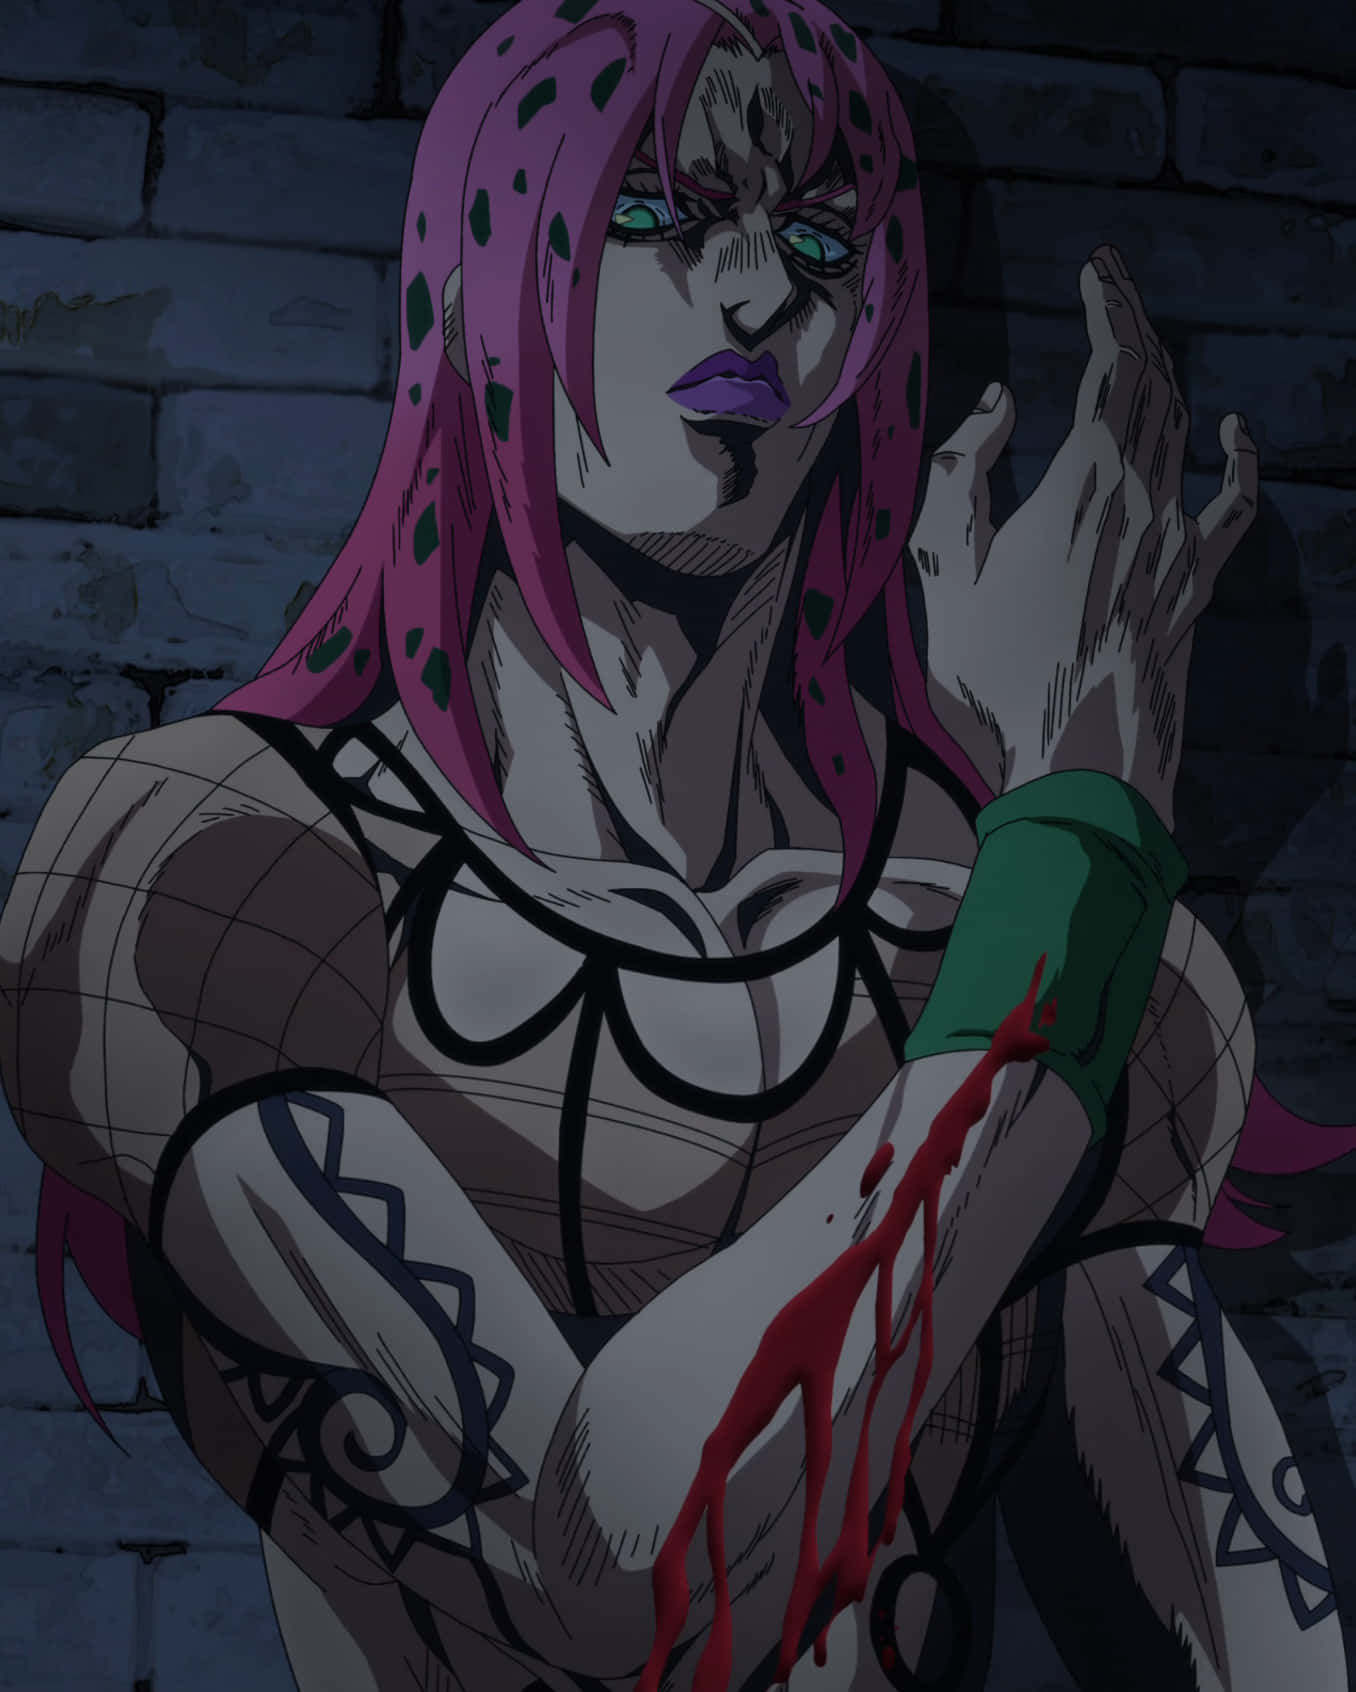 Diavolo, the head of the Passione crime syndicate and the main antagonist of Jojo Bizarre Adventure Part 5: Golden Wind. Wallpaper